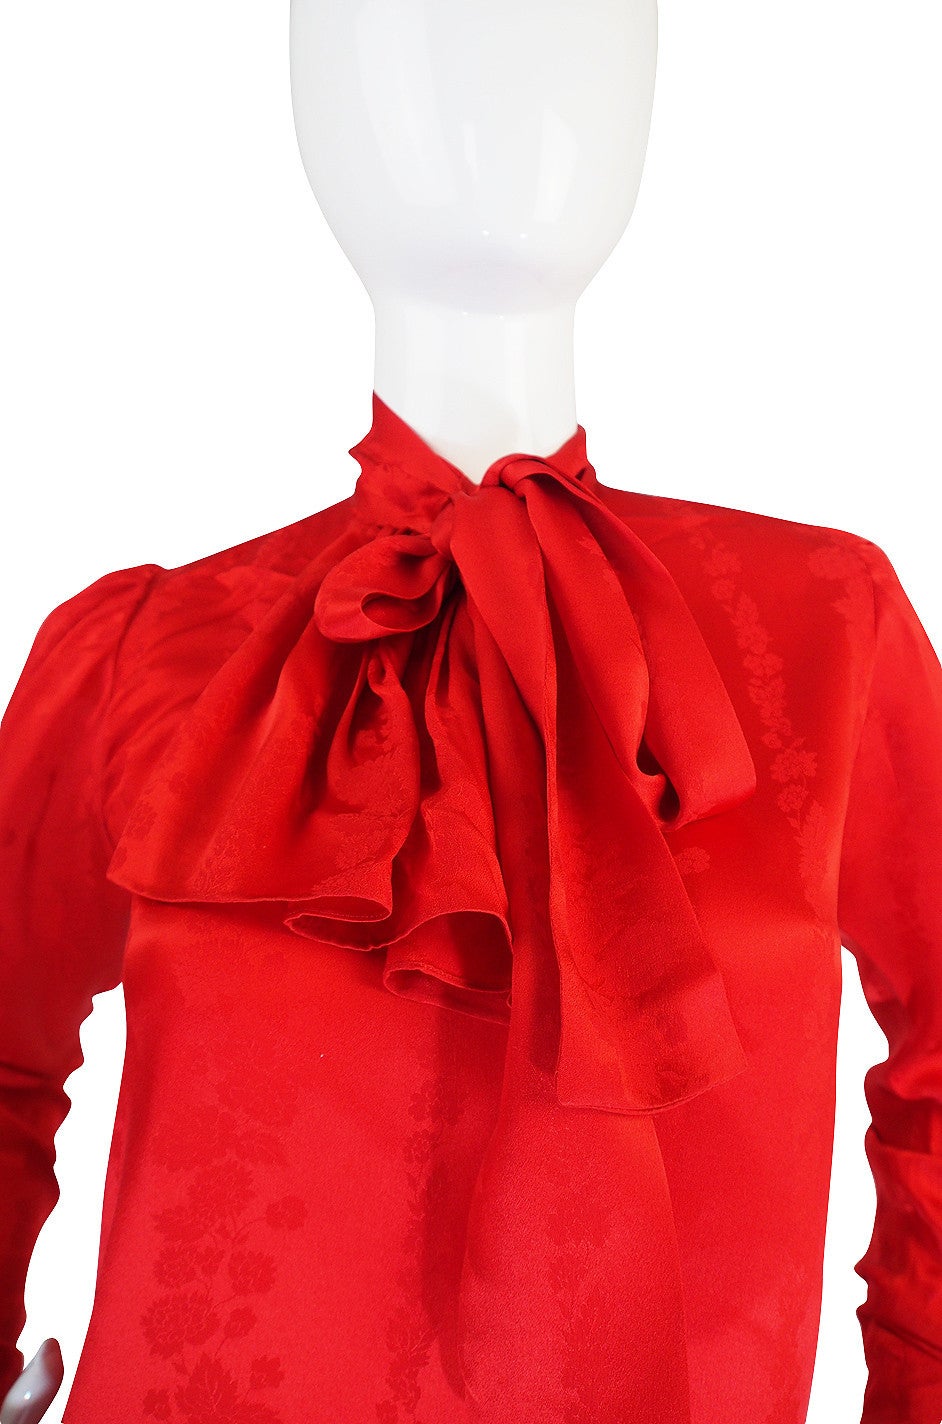 Women's 1979 Yves Saint Laurent Haute Couture Red Silk Top For Sale